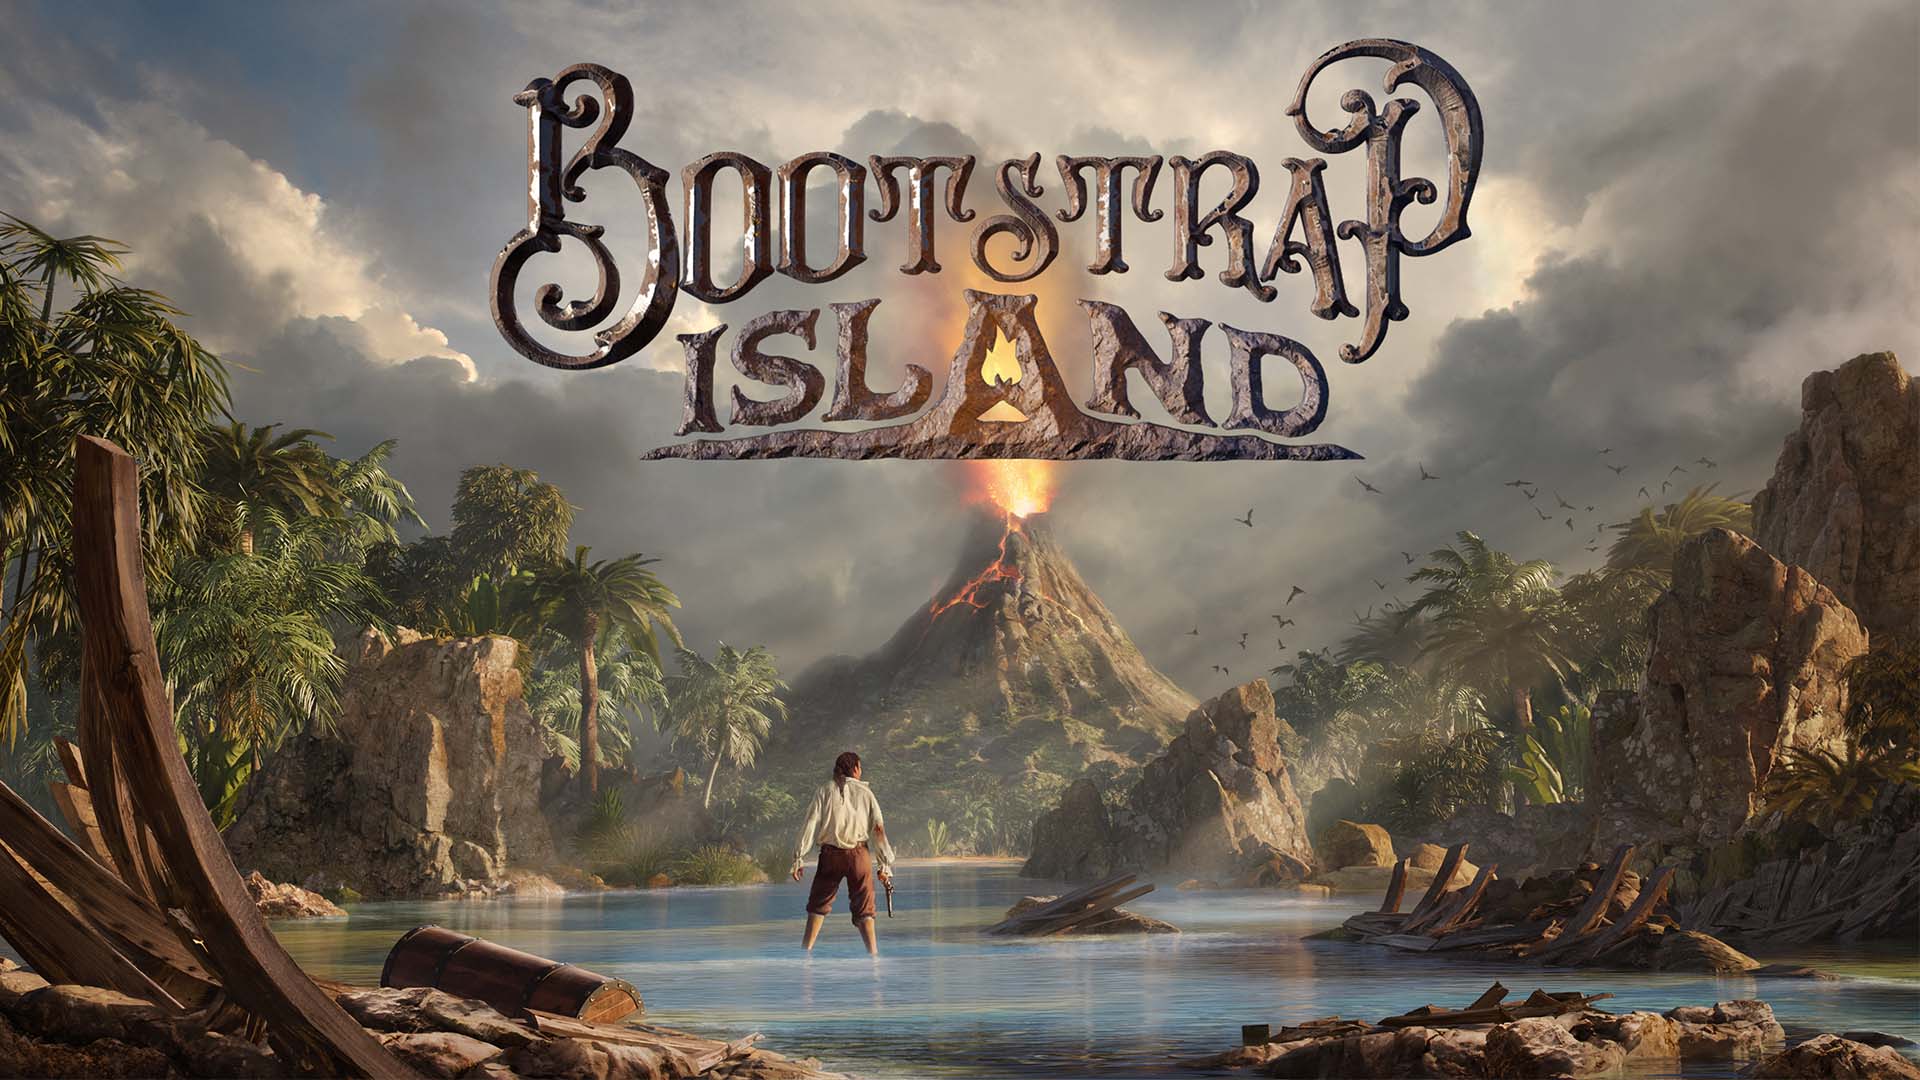 ‘Bootstrap Island’ Announces Early Access Date news